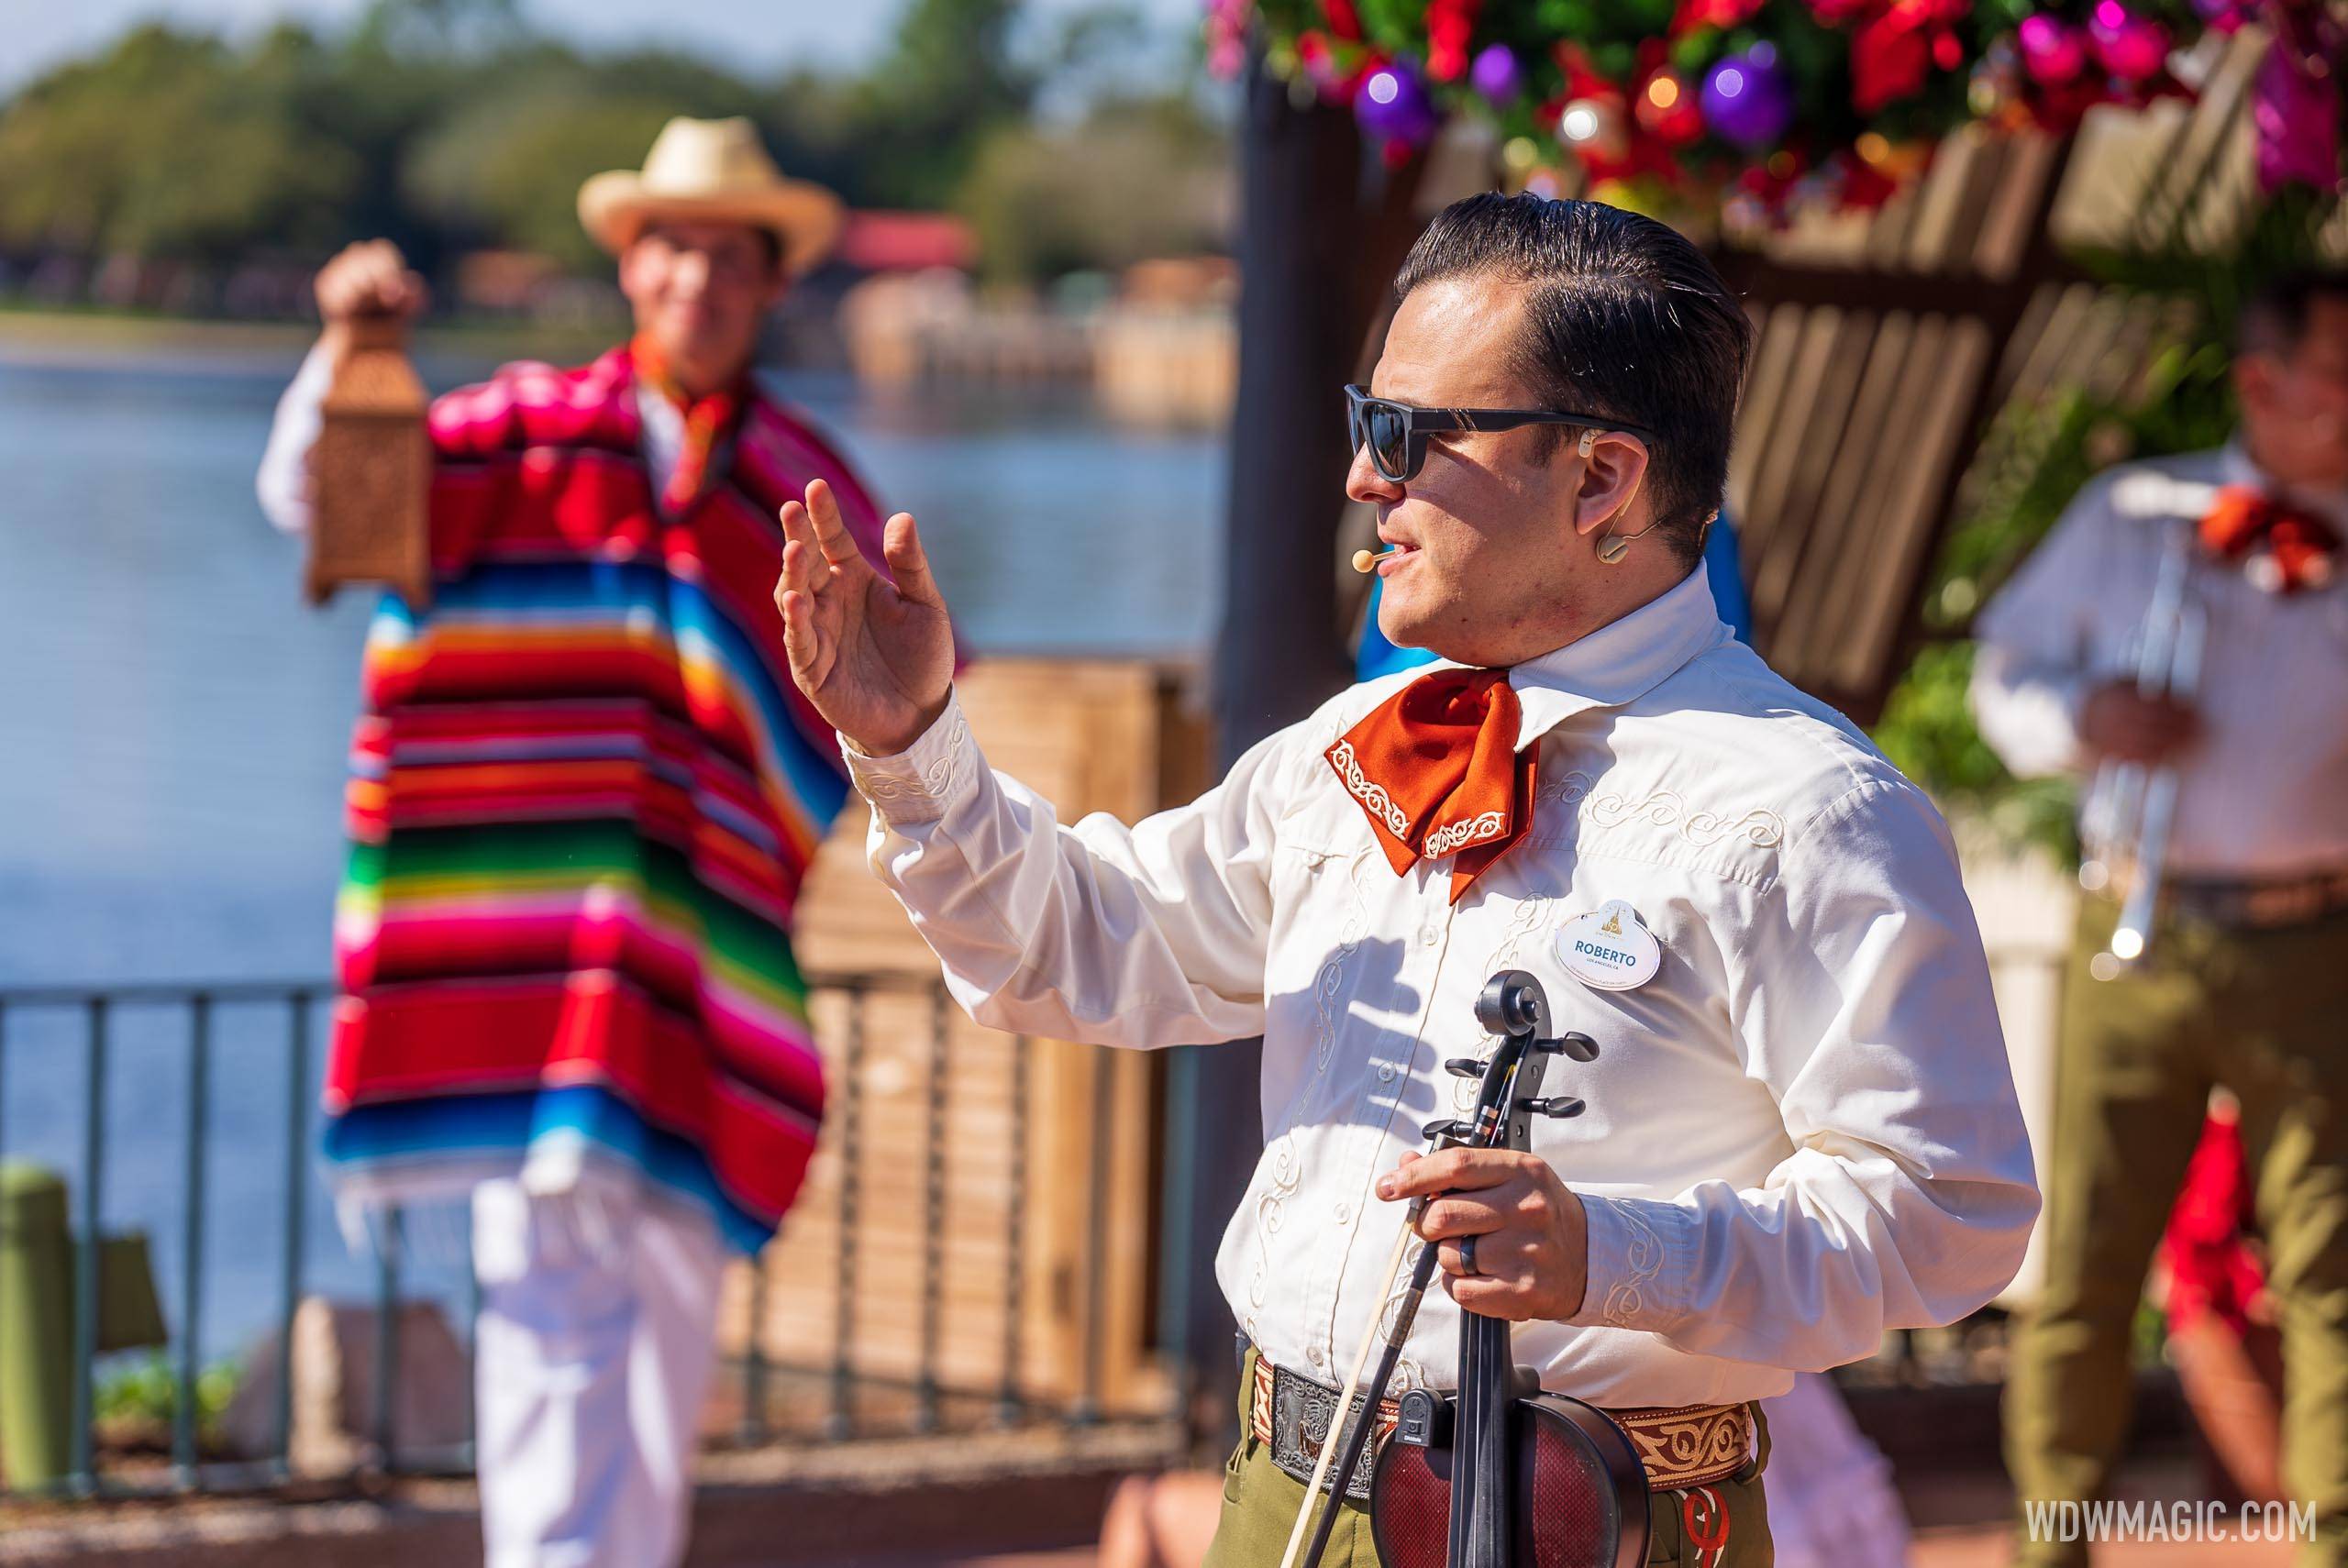 EPCOT Holiday Storytellers 2021 - Mexico pavilion